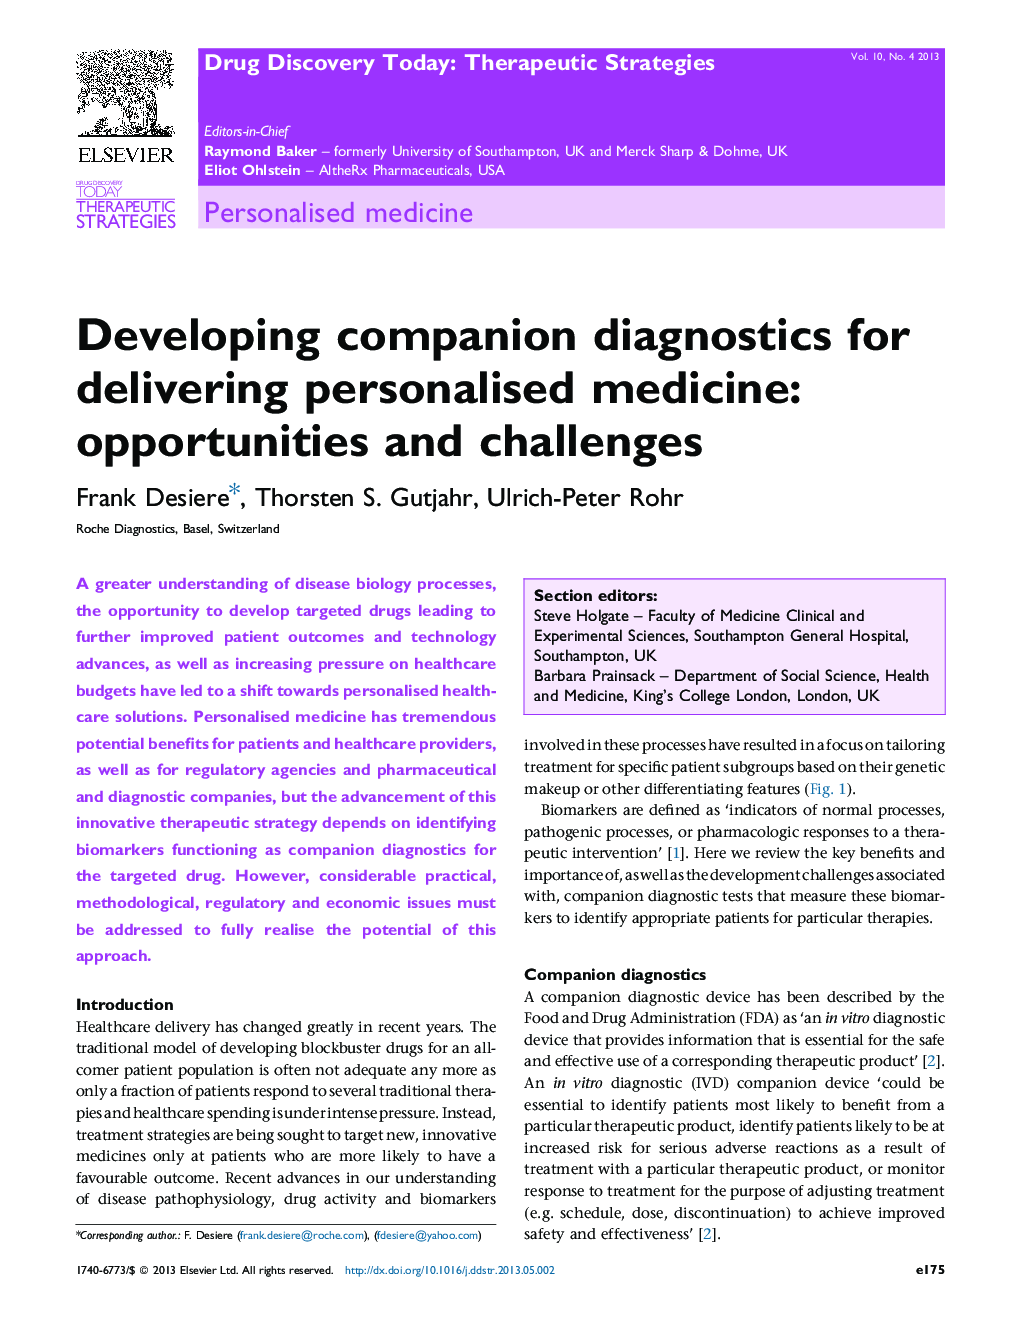 Developing companion diagnostics for delivering personalised medicine: opportunities and challenges